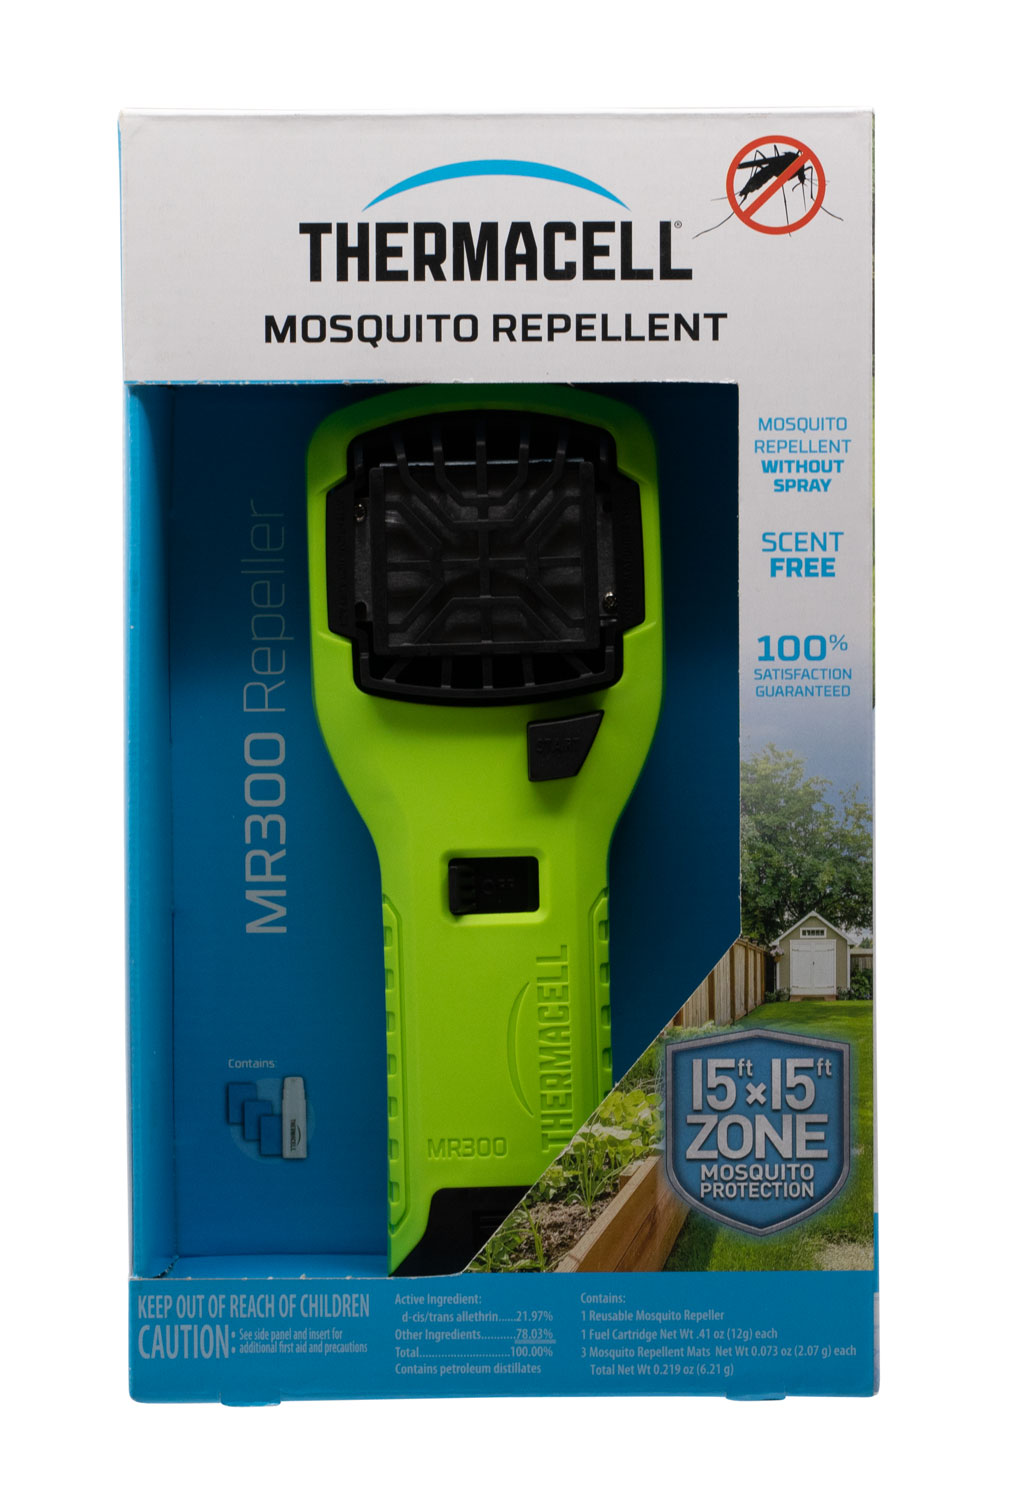 Thermacell MR300V MR300 Portable Repeller Yellow Effective 15 ft Odorless Repellent Effective Up to 12 hrs